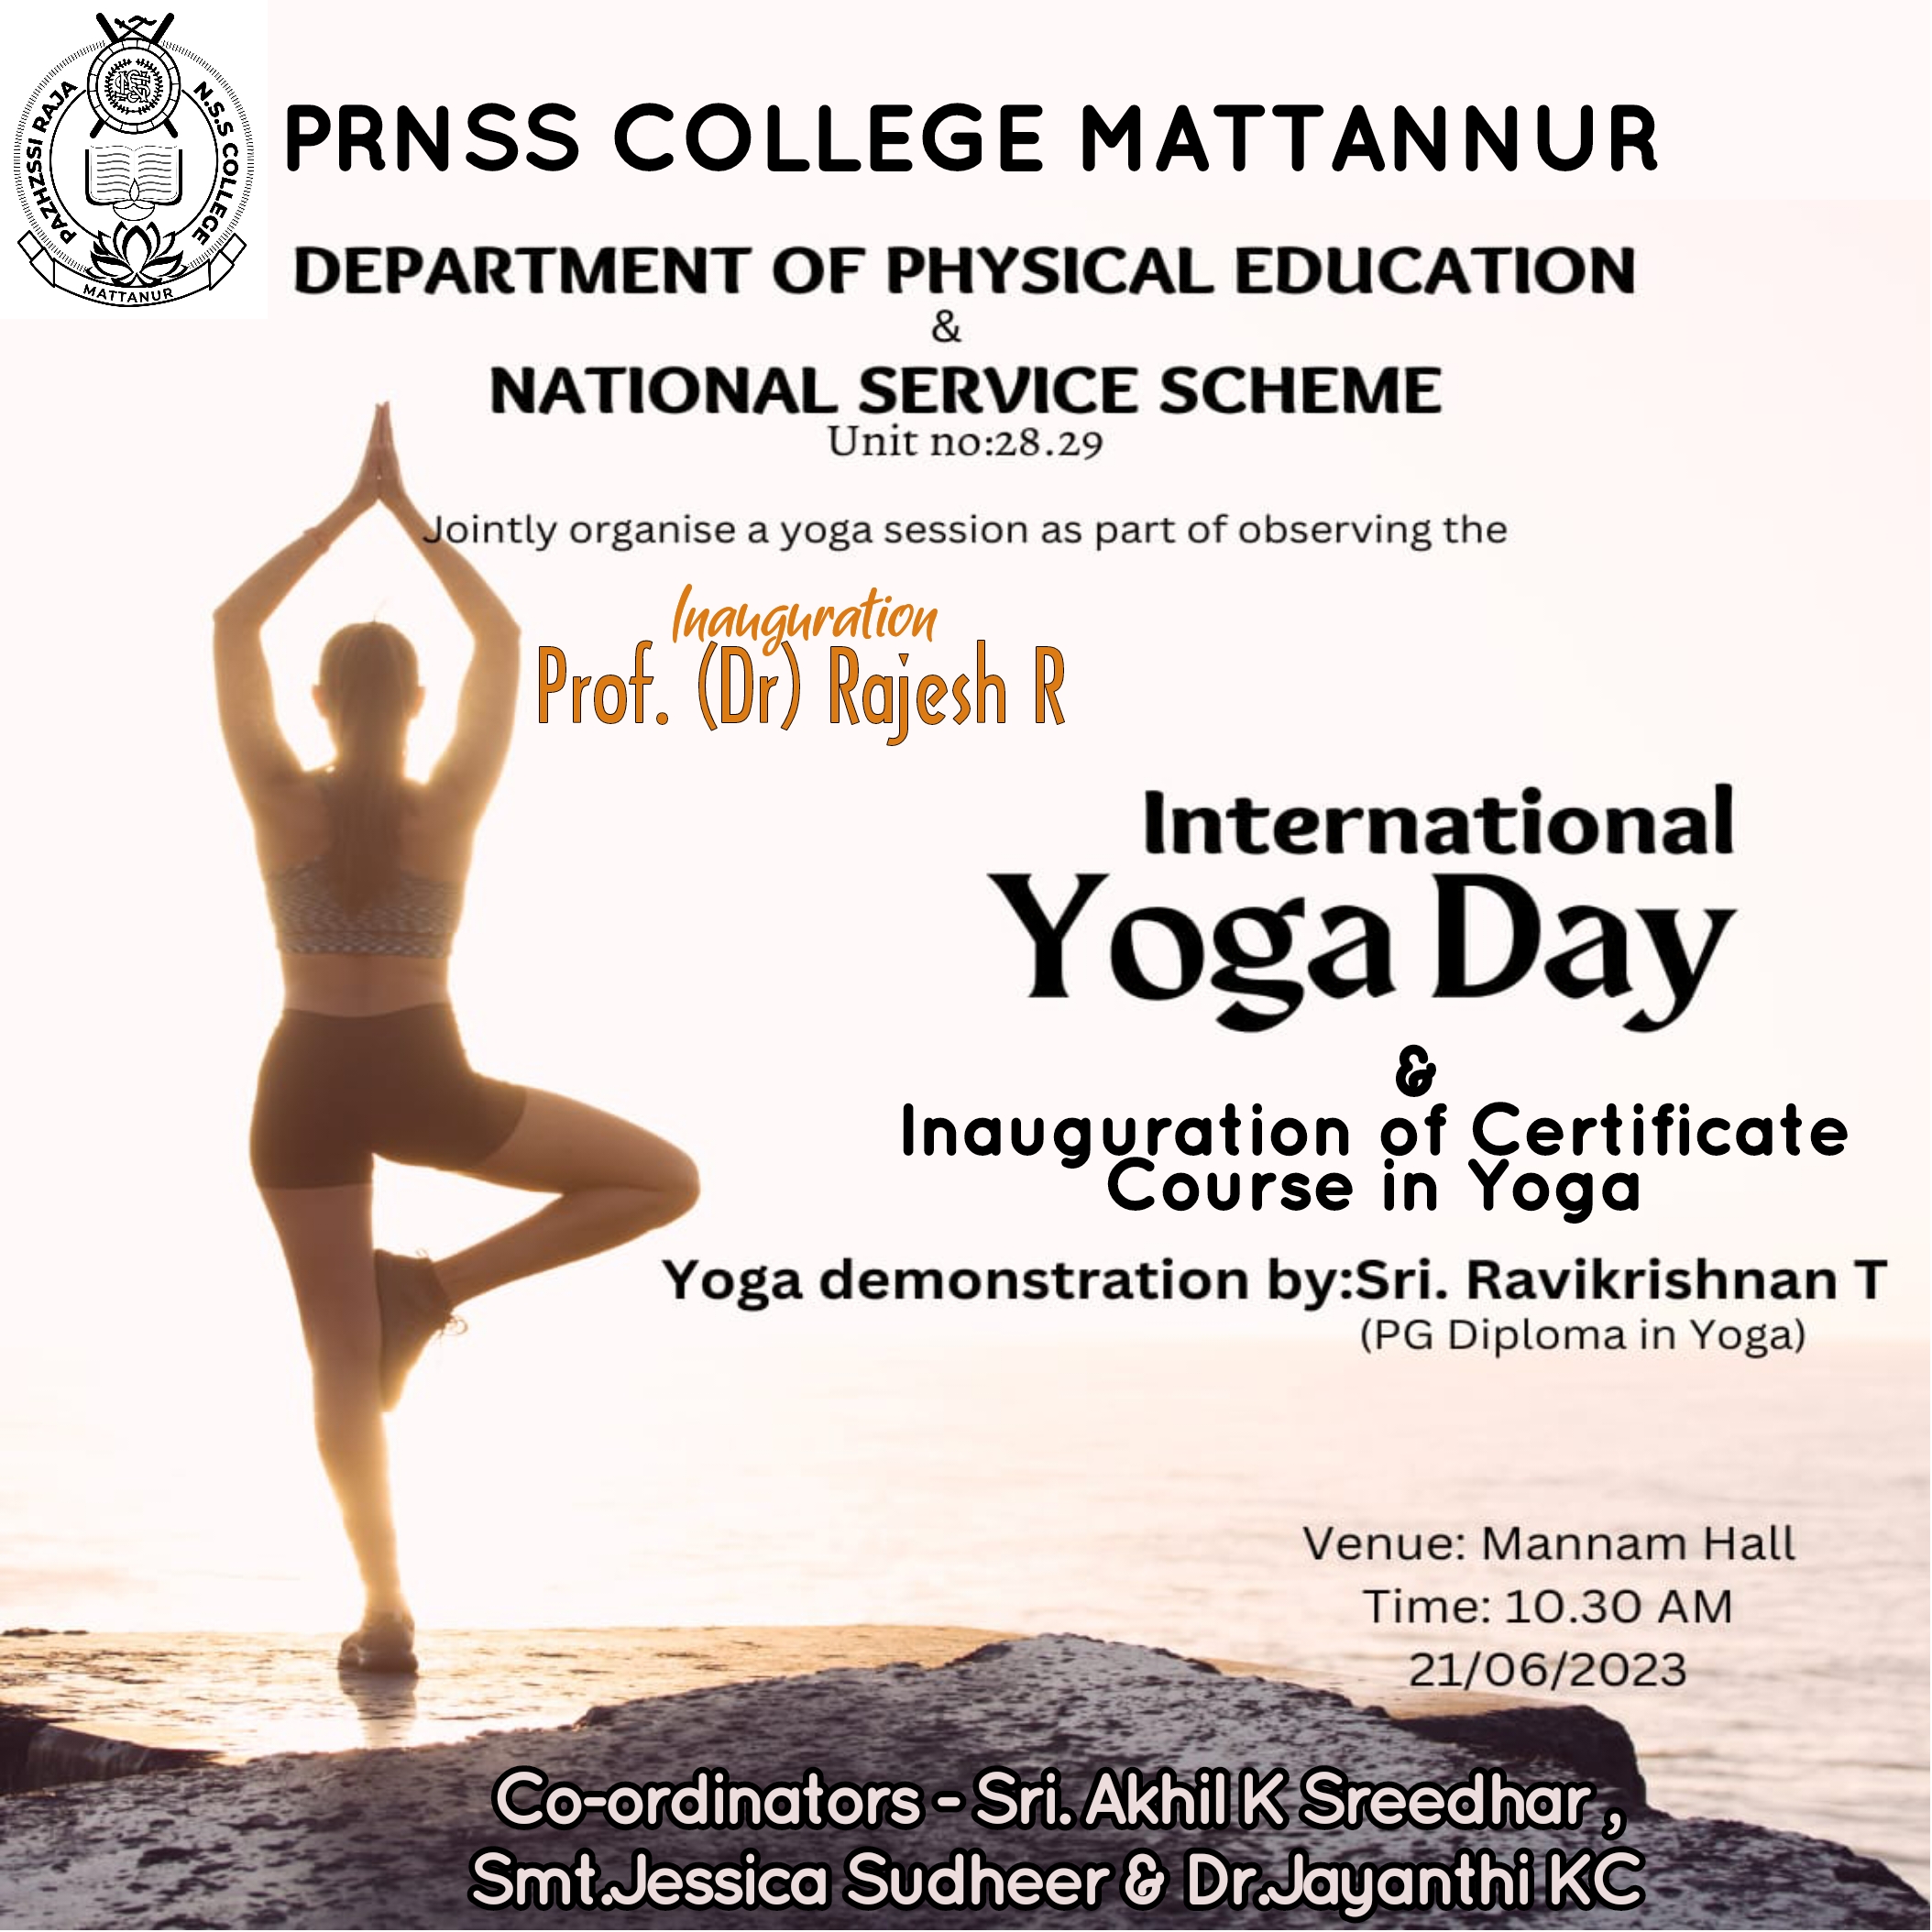 Yoga day Celebration & Inauguration of certificate course in yoga